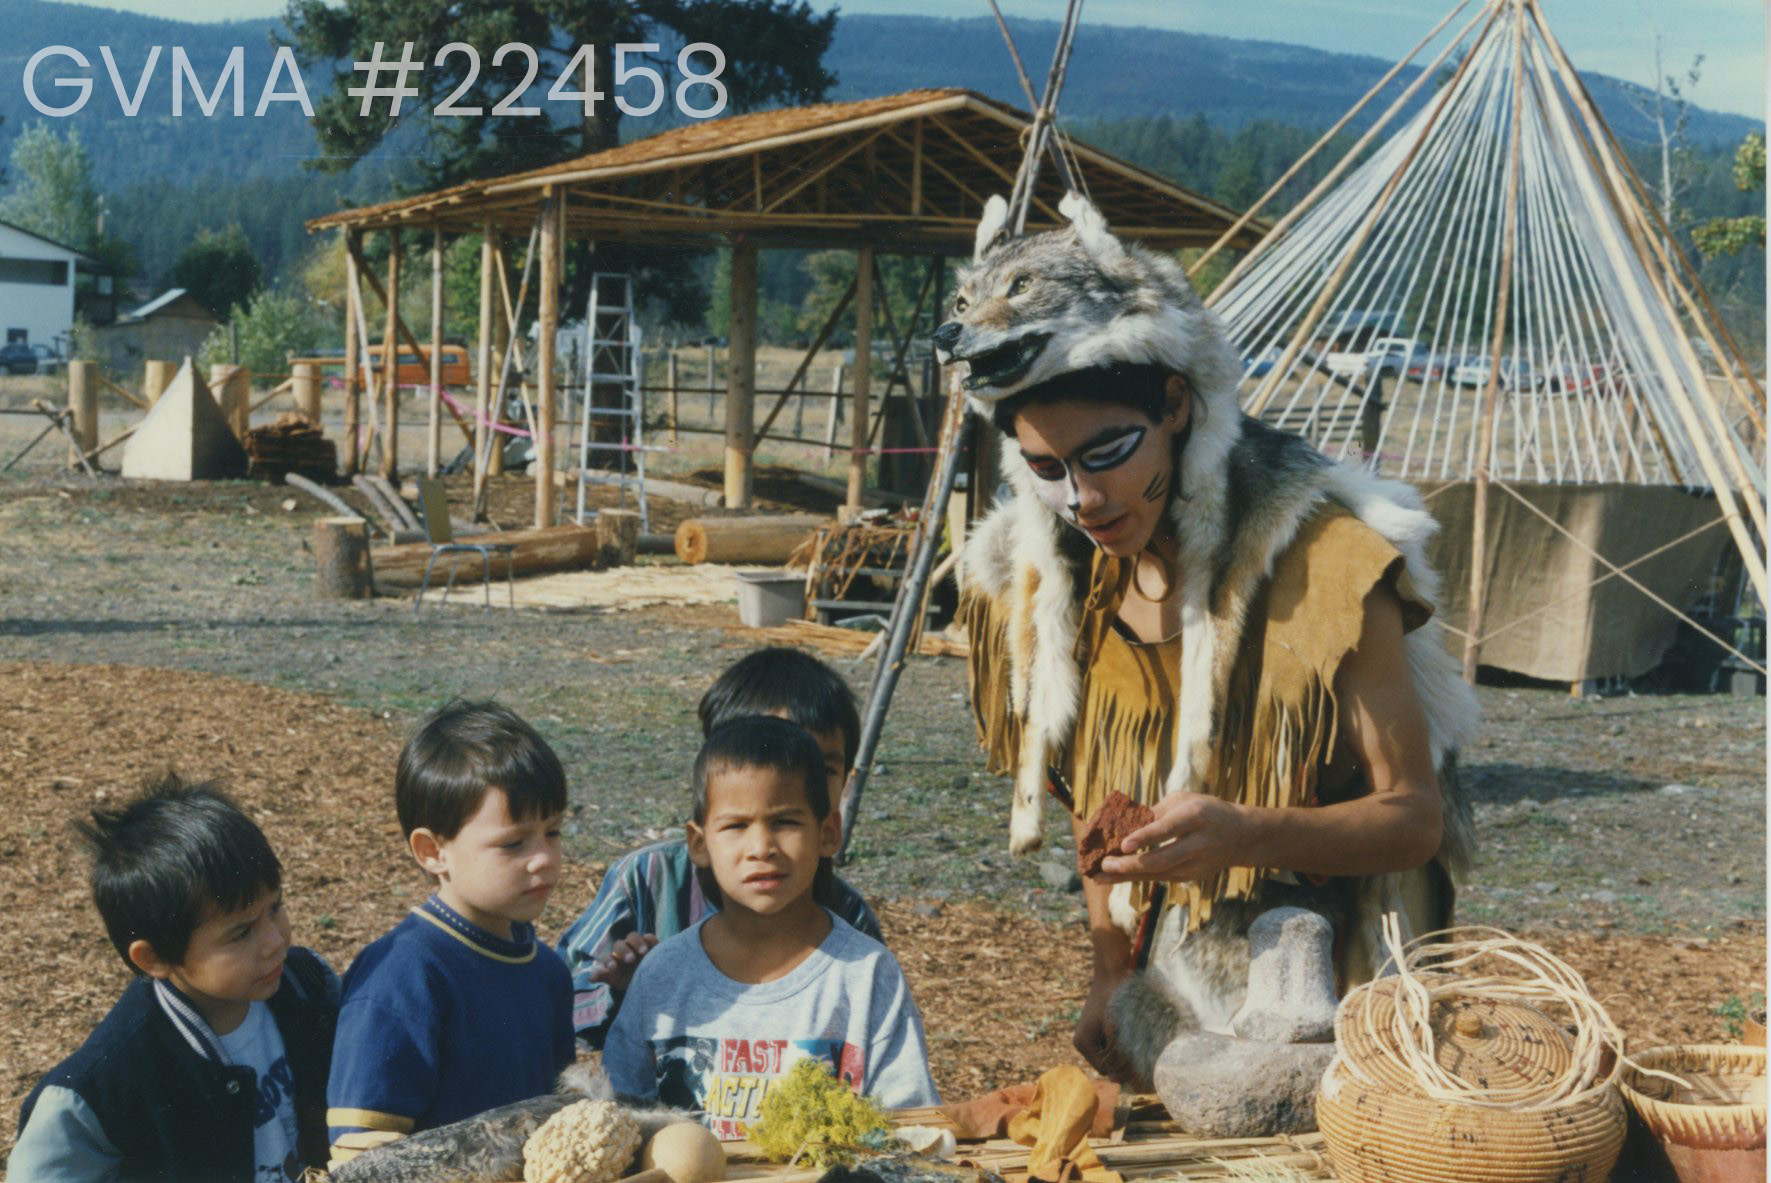 An outdoor camp setup. In the background is a wooden roofed structure, as well as a teepee. In the foreground is four children and an adult. The four little boys have dark hair. Three are watching the adult, while one is looking at the camera. The adult is wearing leather clothing, and his face is panted in black and white. He has a wolf skin over his head and hanging down his shoulders. He is looking down at a rock in his head. In front of him are two woven baskets.